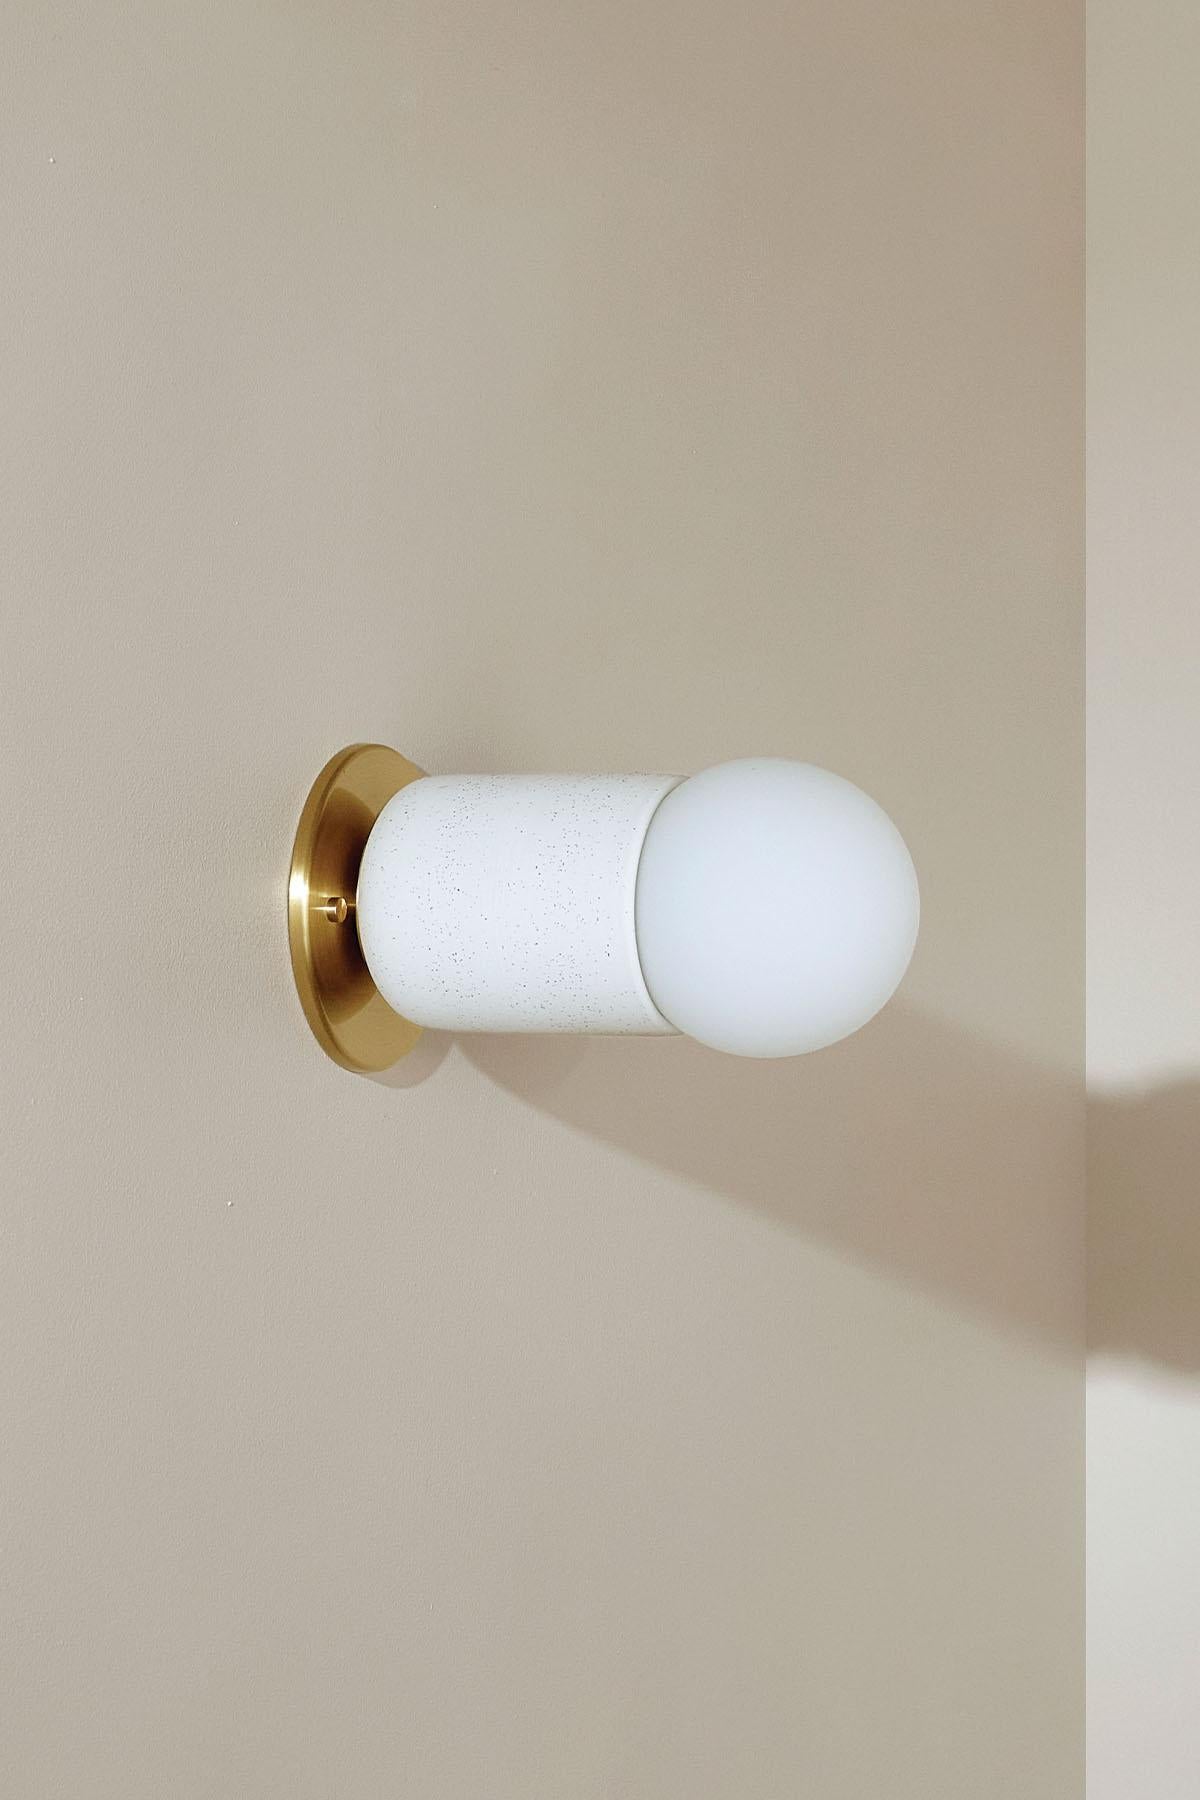 Simple cylindrical ceramic forms define the Terra 1 range, which comes in pendant light, wall light, and in long and short articulating wall light formats. The Terra 1 Surface Sconce, Slim Base is available in a choice of three tones – Slate, Sage